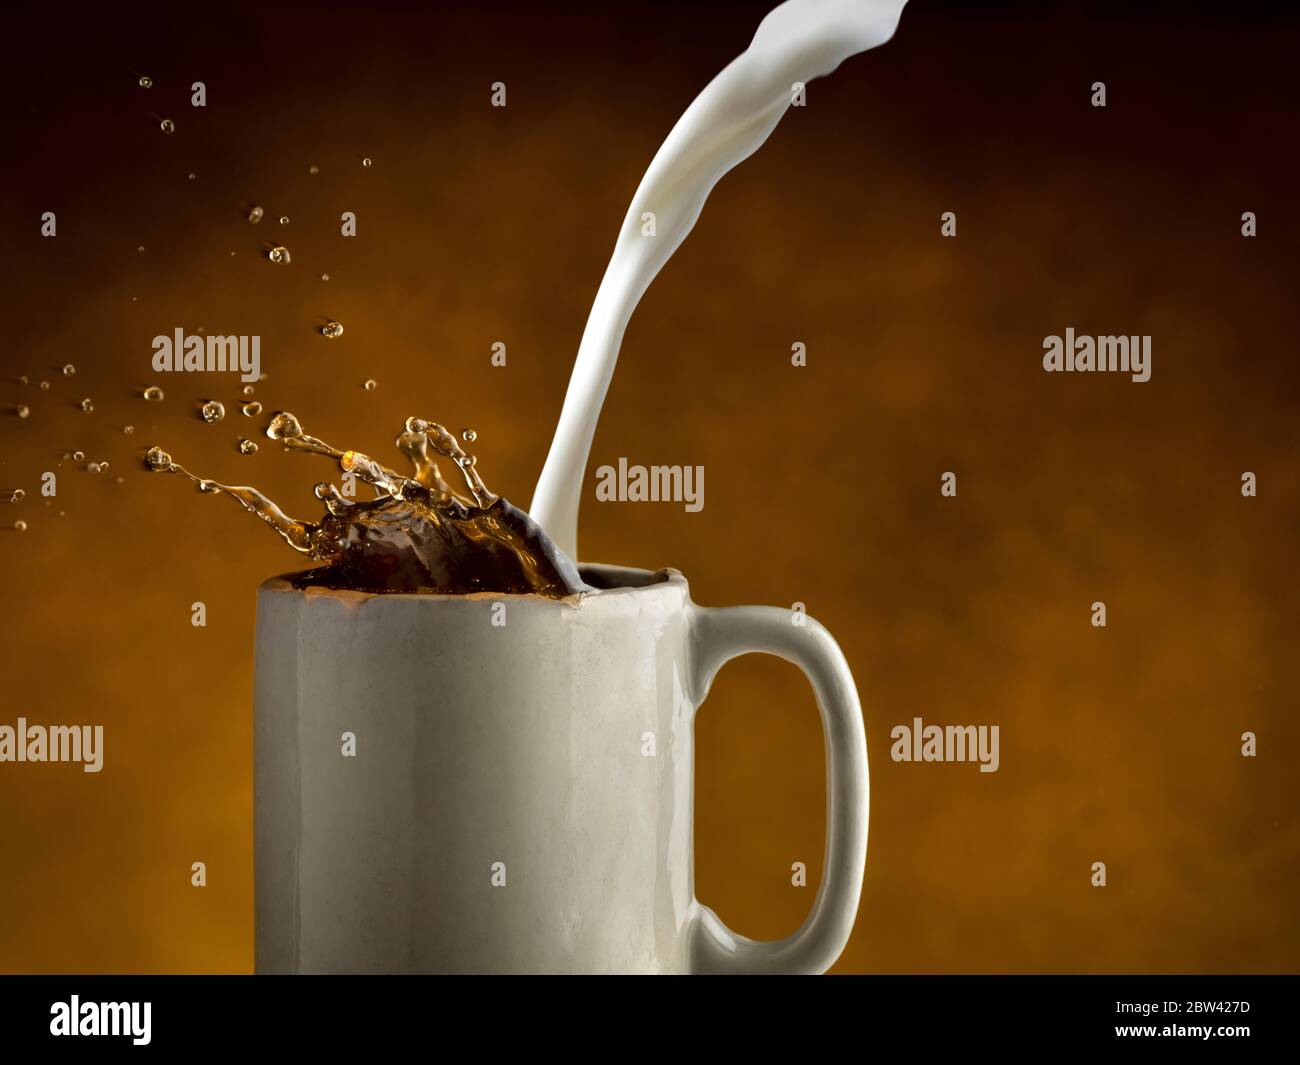 https://c8.alamy.com/comp/2BW427D/milk-being-poured-into-coffee-making-coffee-splash-out-2BW427D.jpg